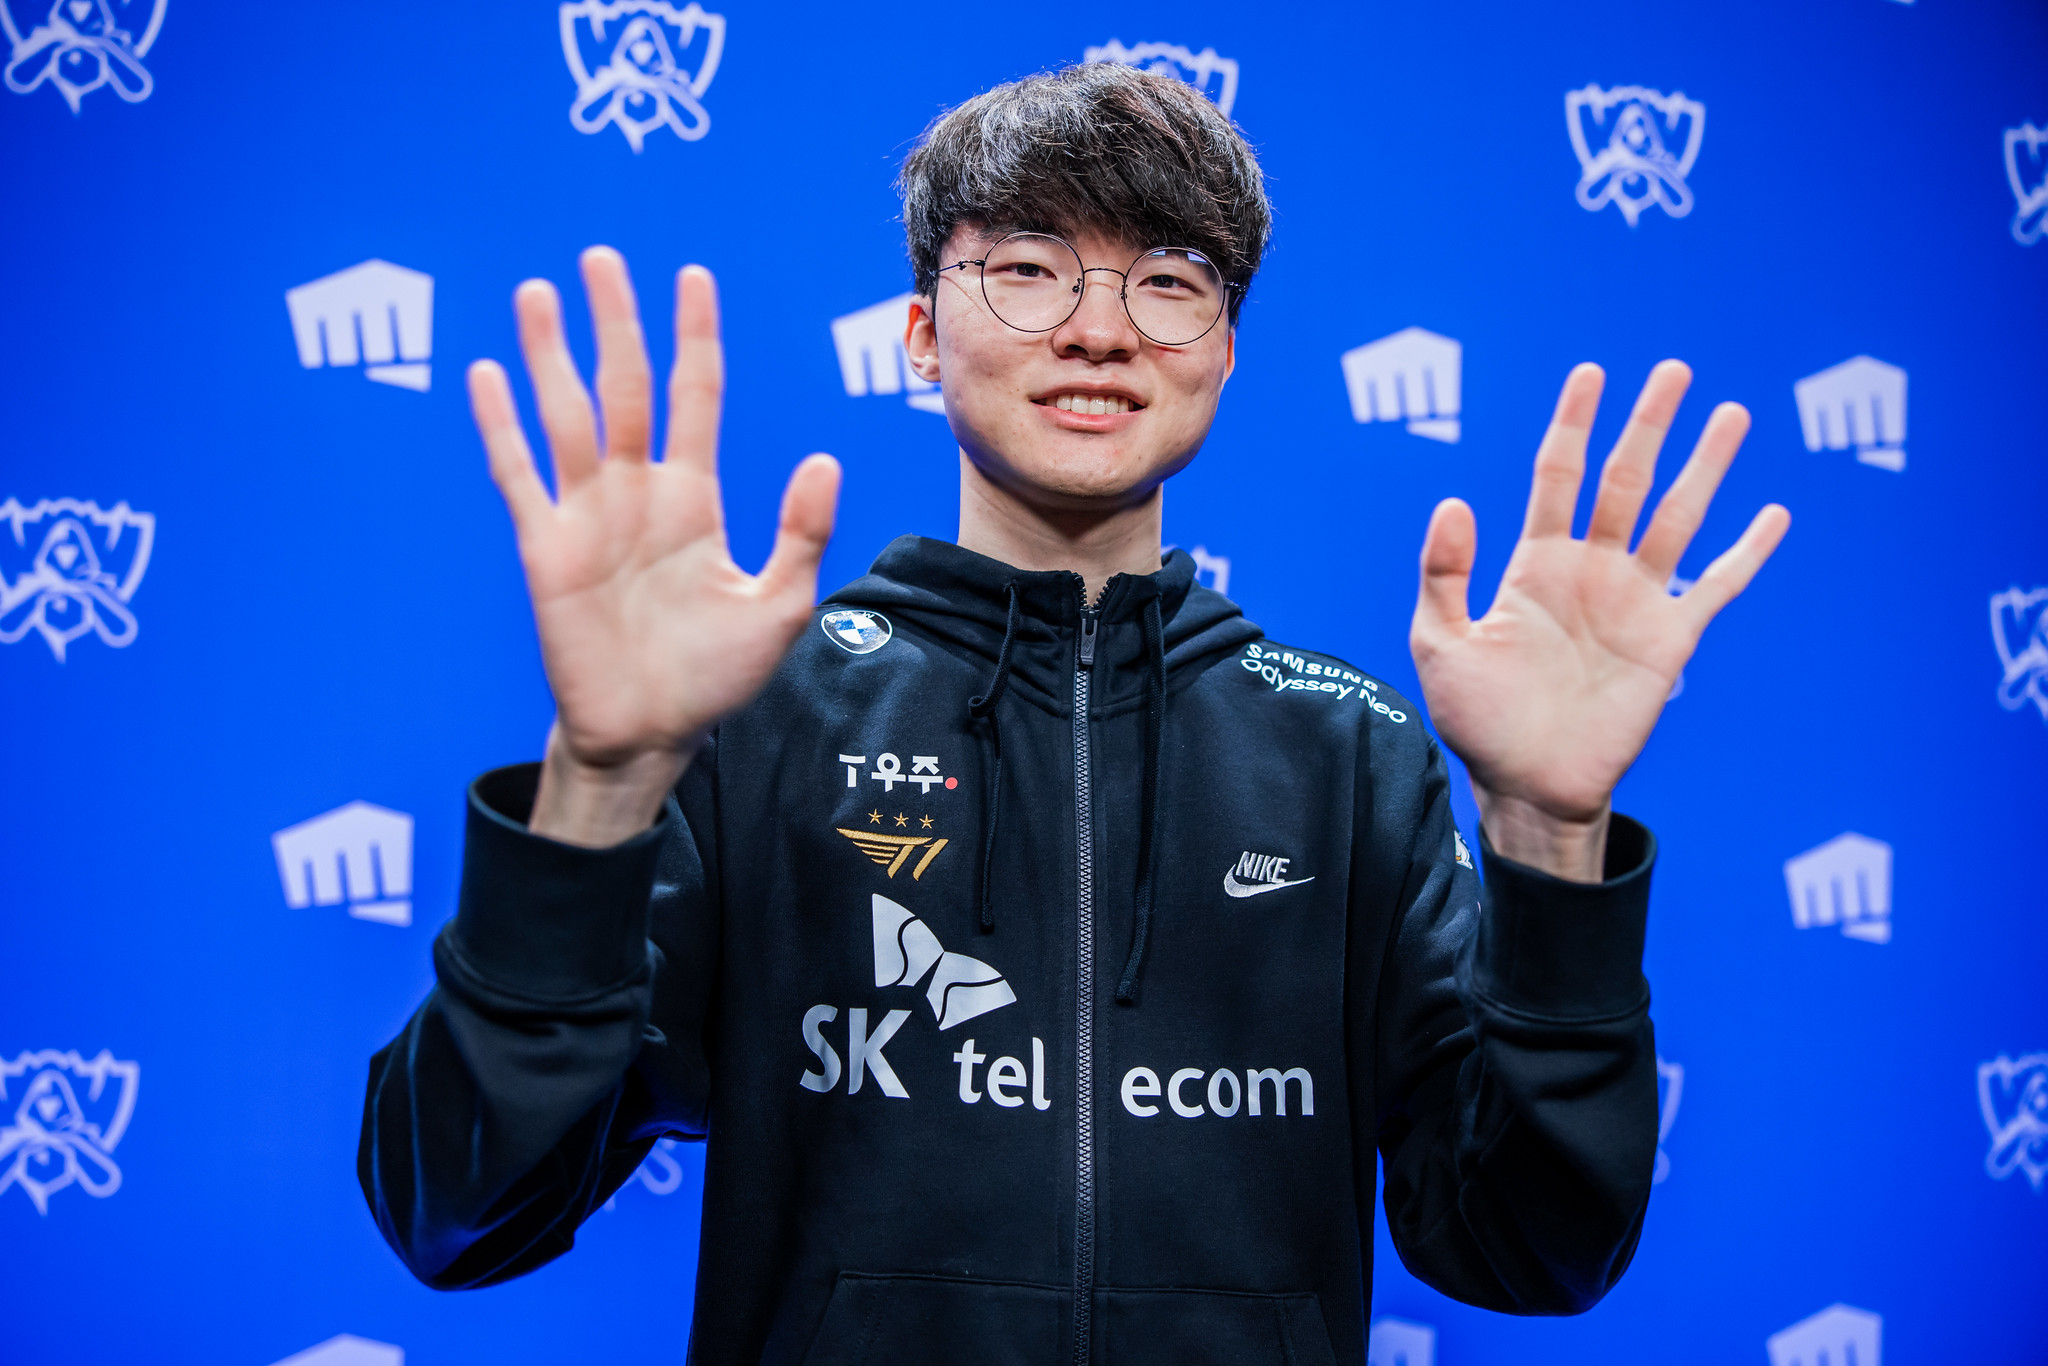 How Old Is Faker? Uncovering The Age Of The World's Most Popular Pro Gamer